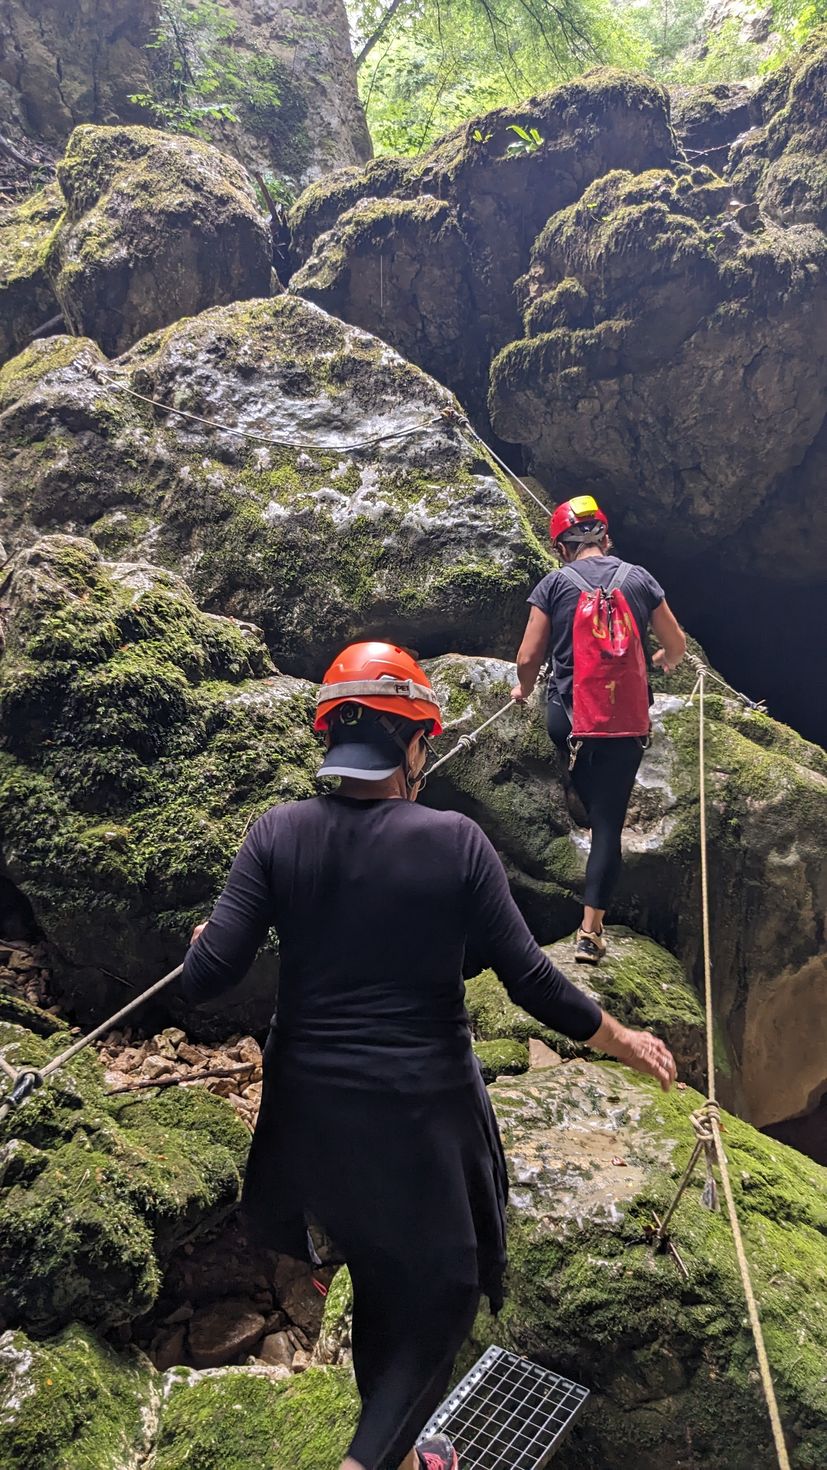 Pazin Cave: An adventure in vibrant green and pitch black